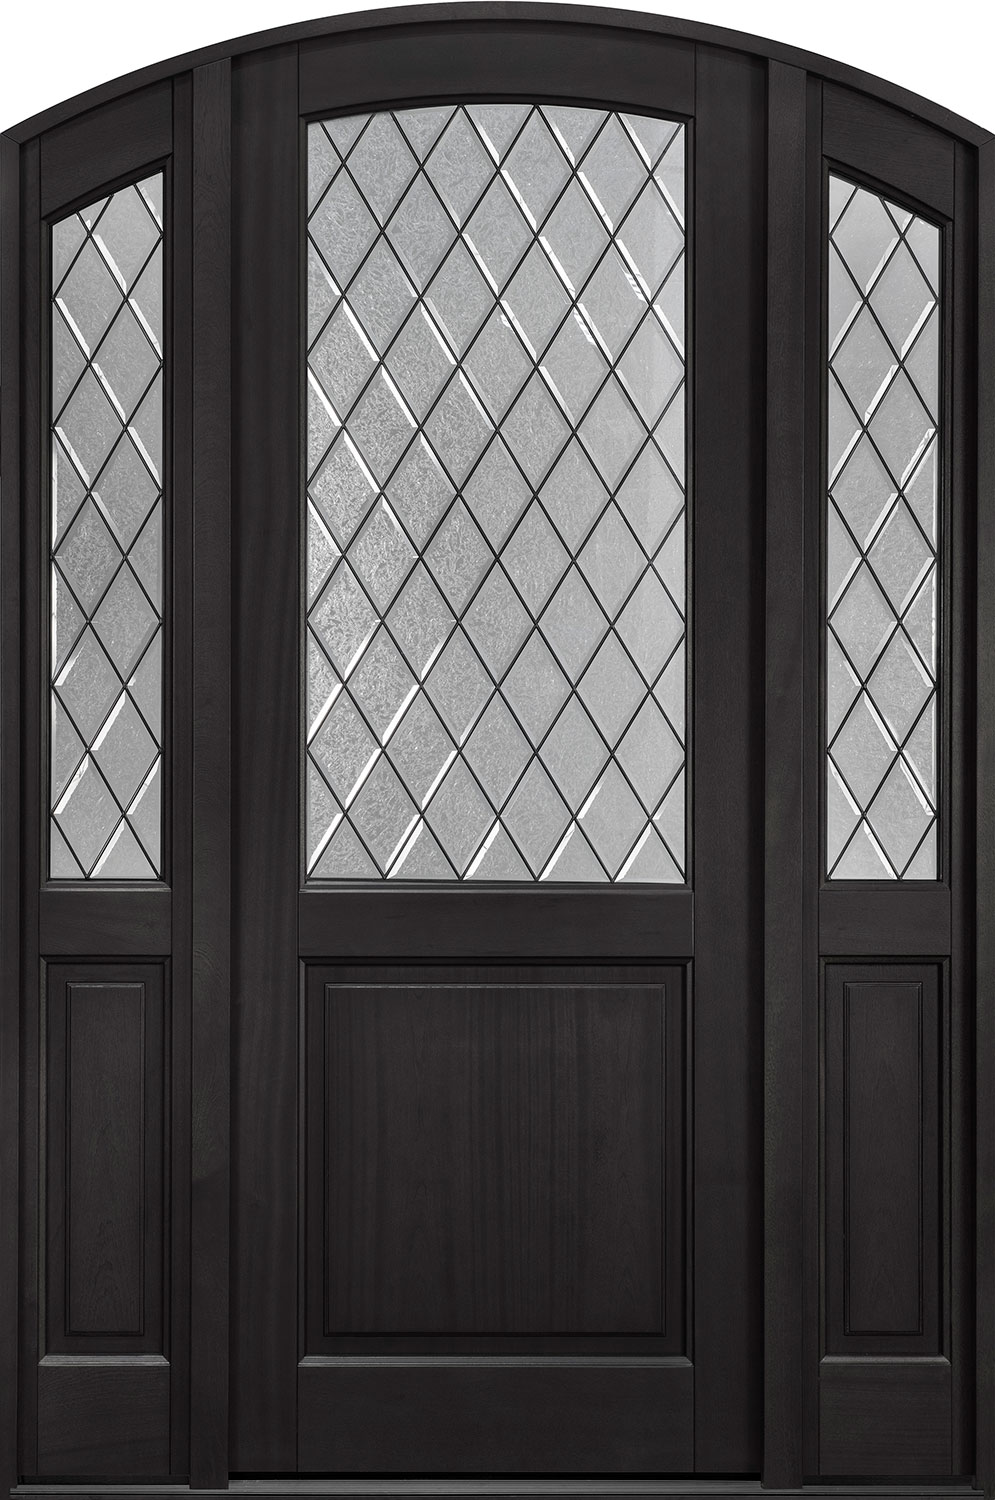 Classic Mahogany Solid Wood Front Entry Door - Single with 2 Sidelites - DB-552PTDG 2SL